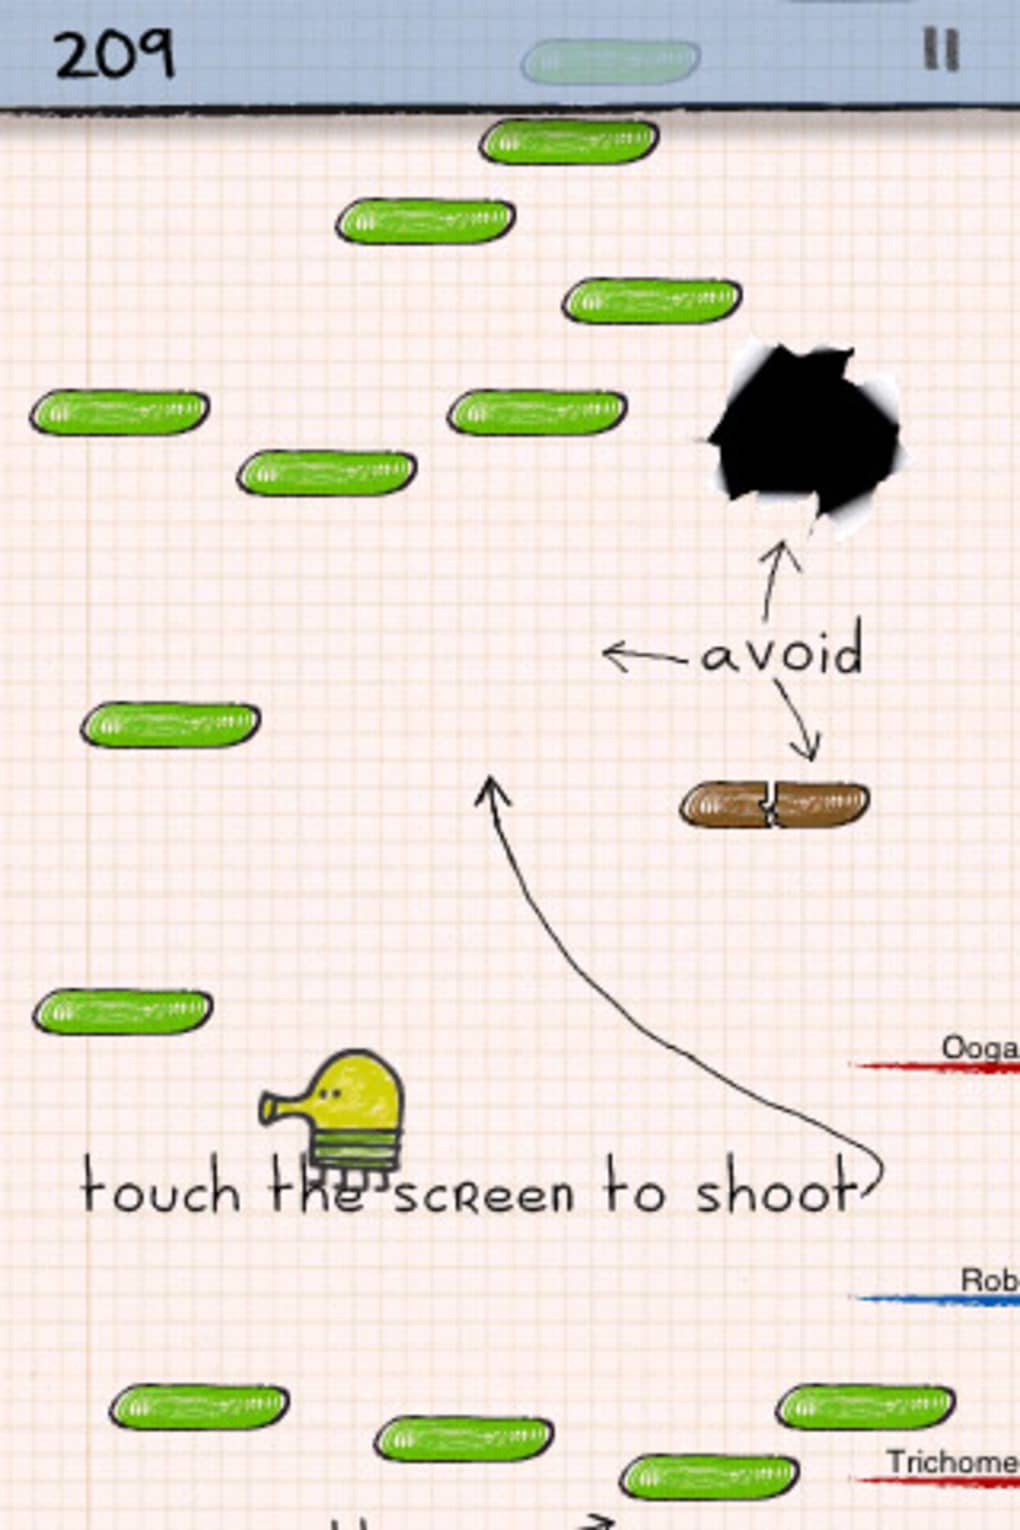 More Doodle Jump for Kinect Screens Released